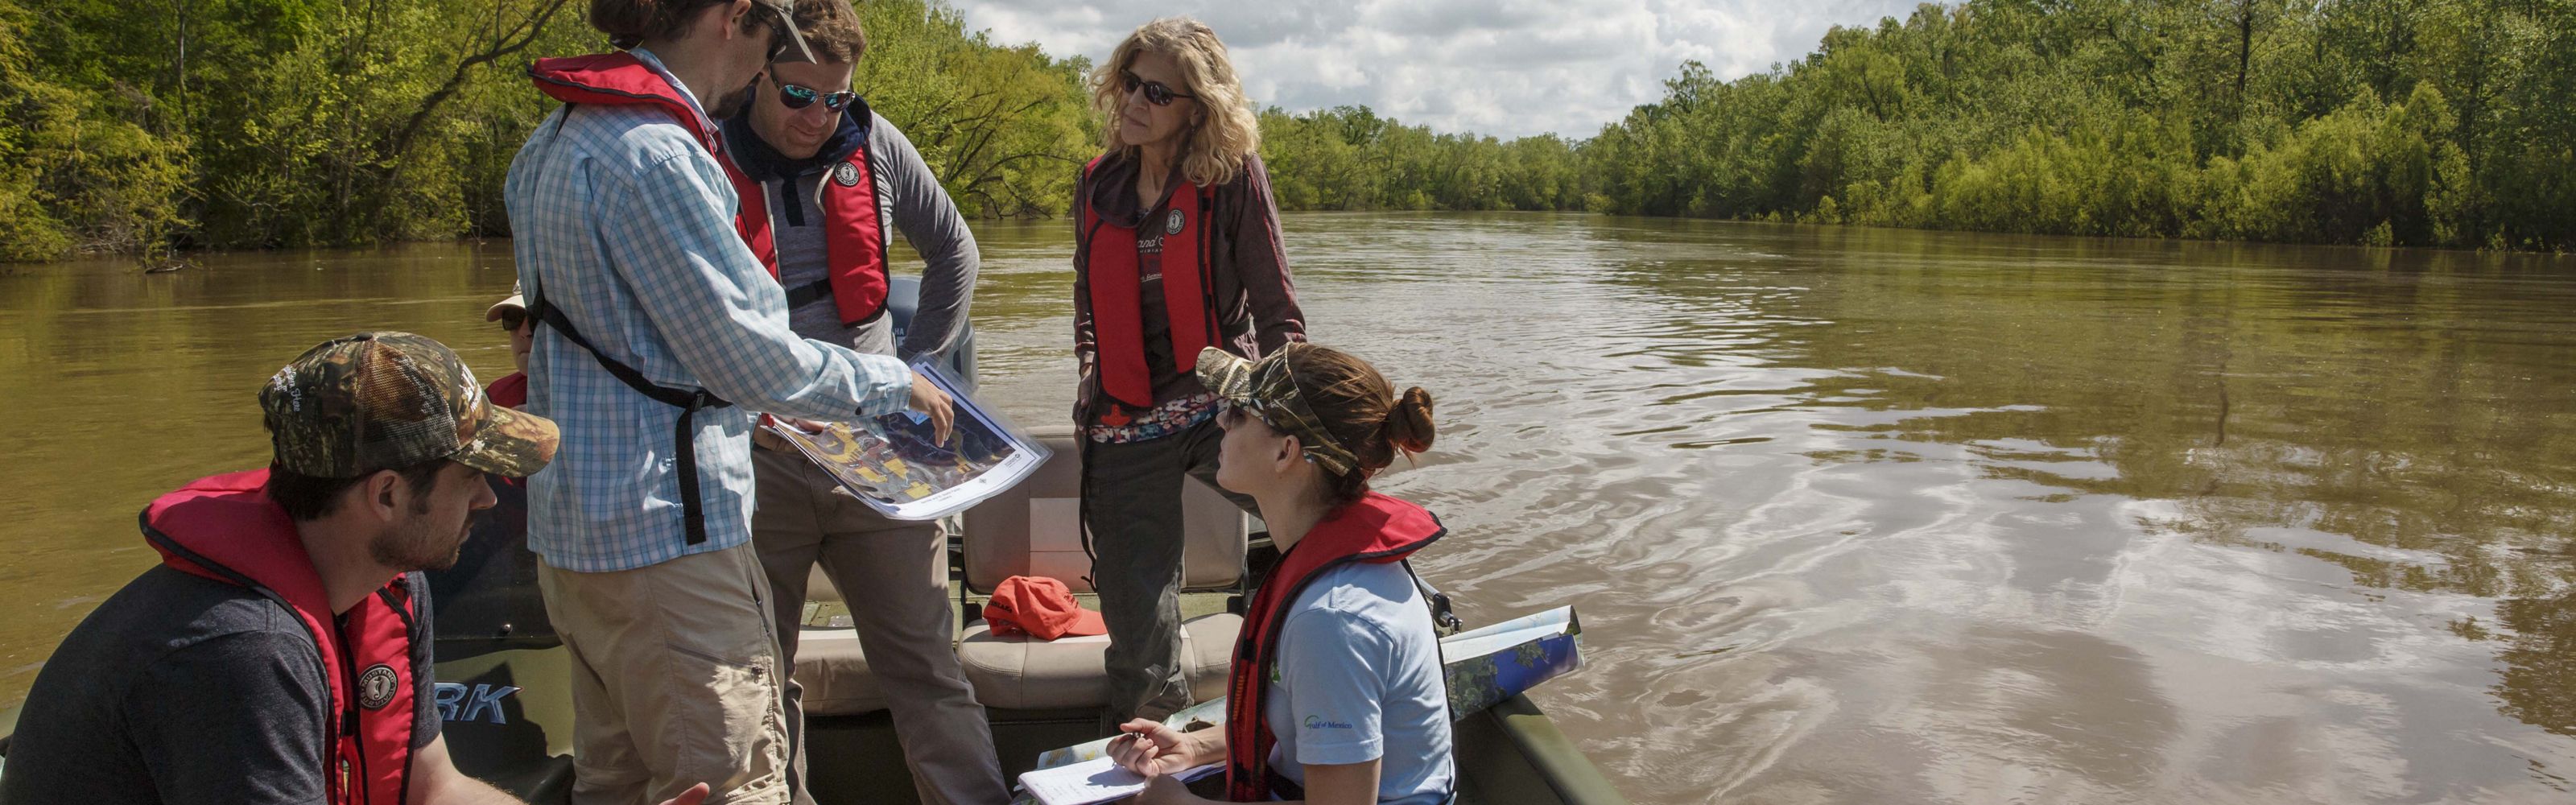 A group of people on a boat in the Atchafalaya River Basin.